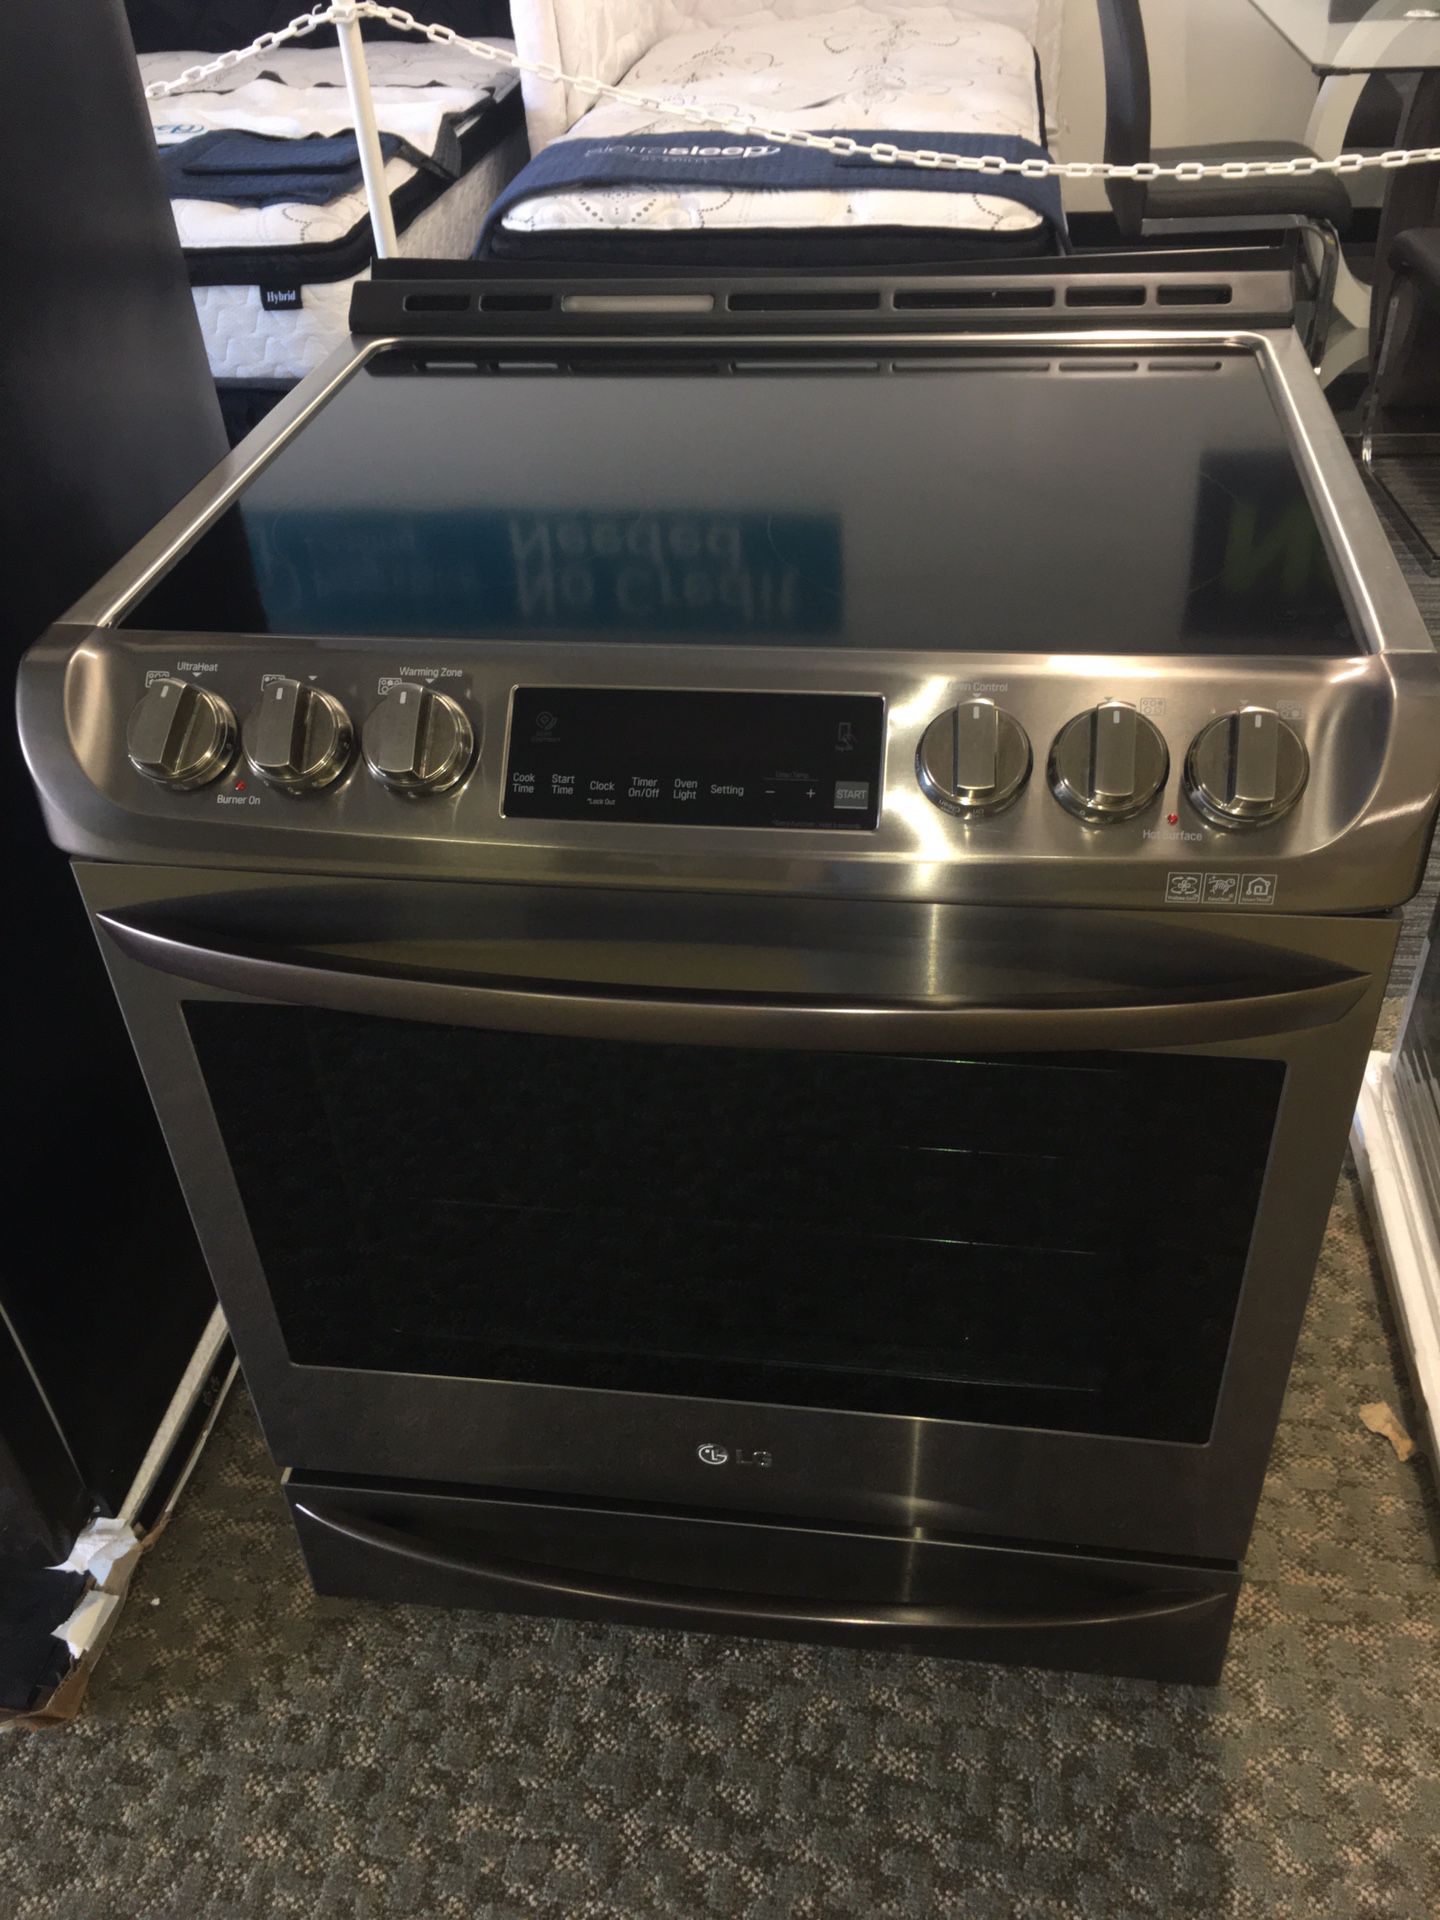 Brand New Black Stainless Steel Elecric Stove Slide-In With Warranty No Credit Needed Just $39 The Down payment Cash price $1,500